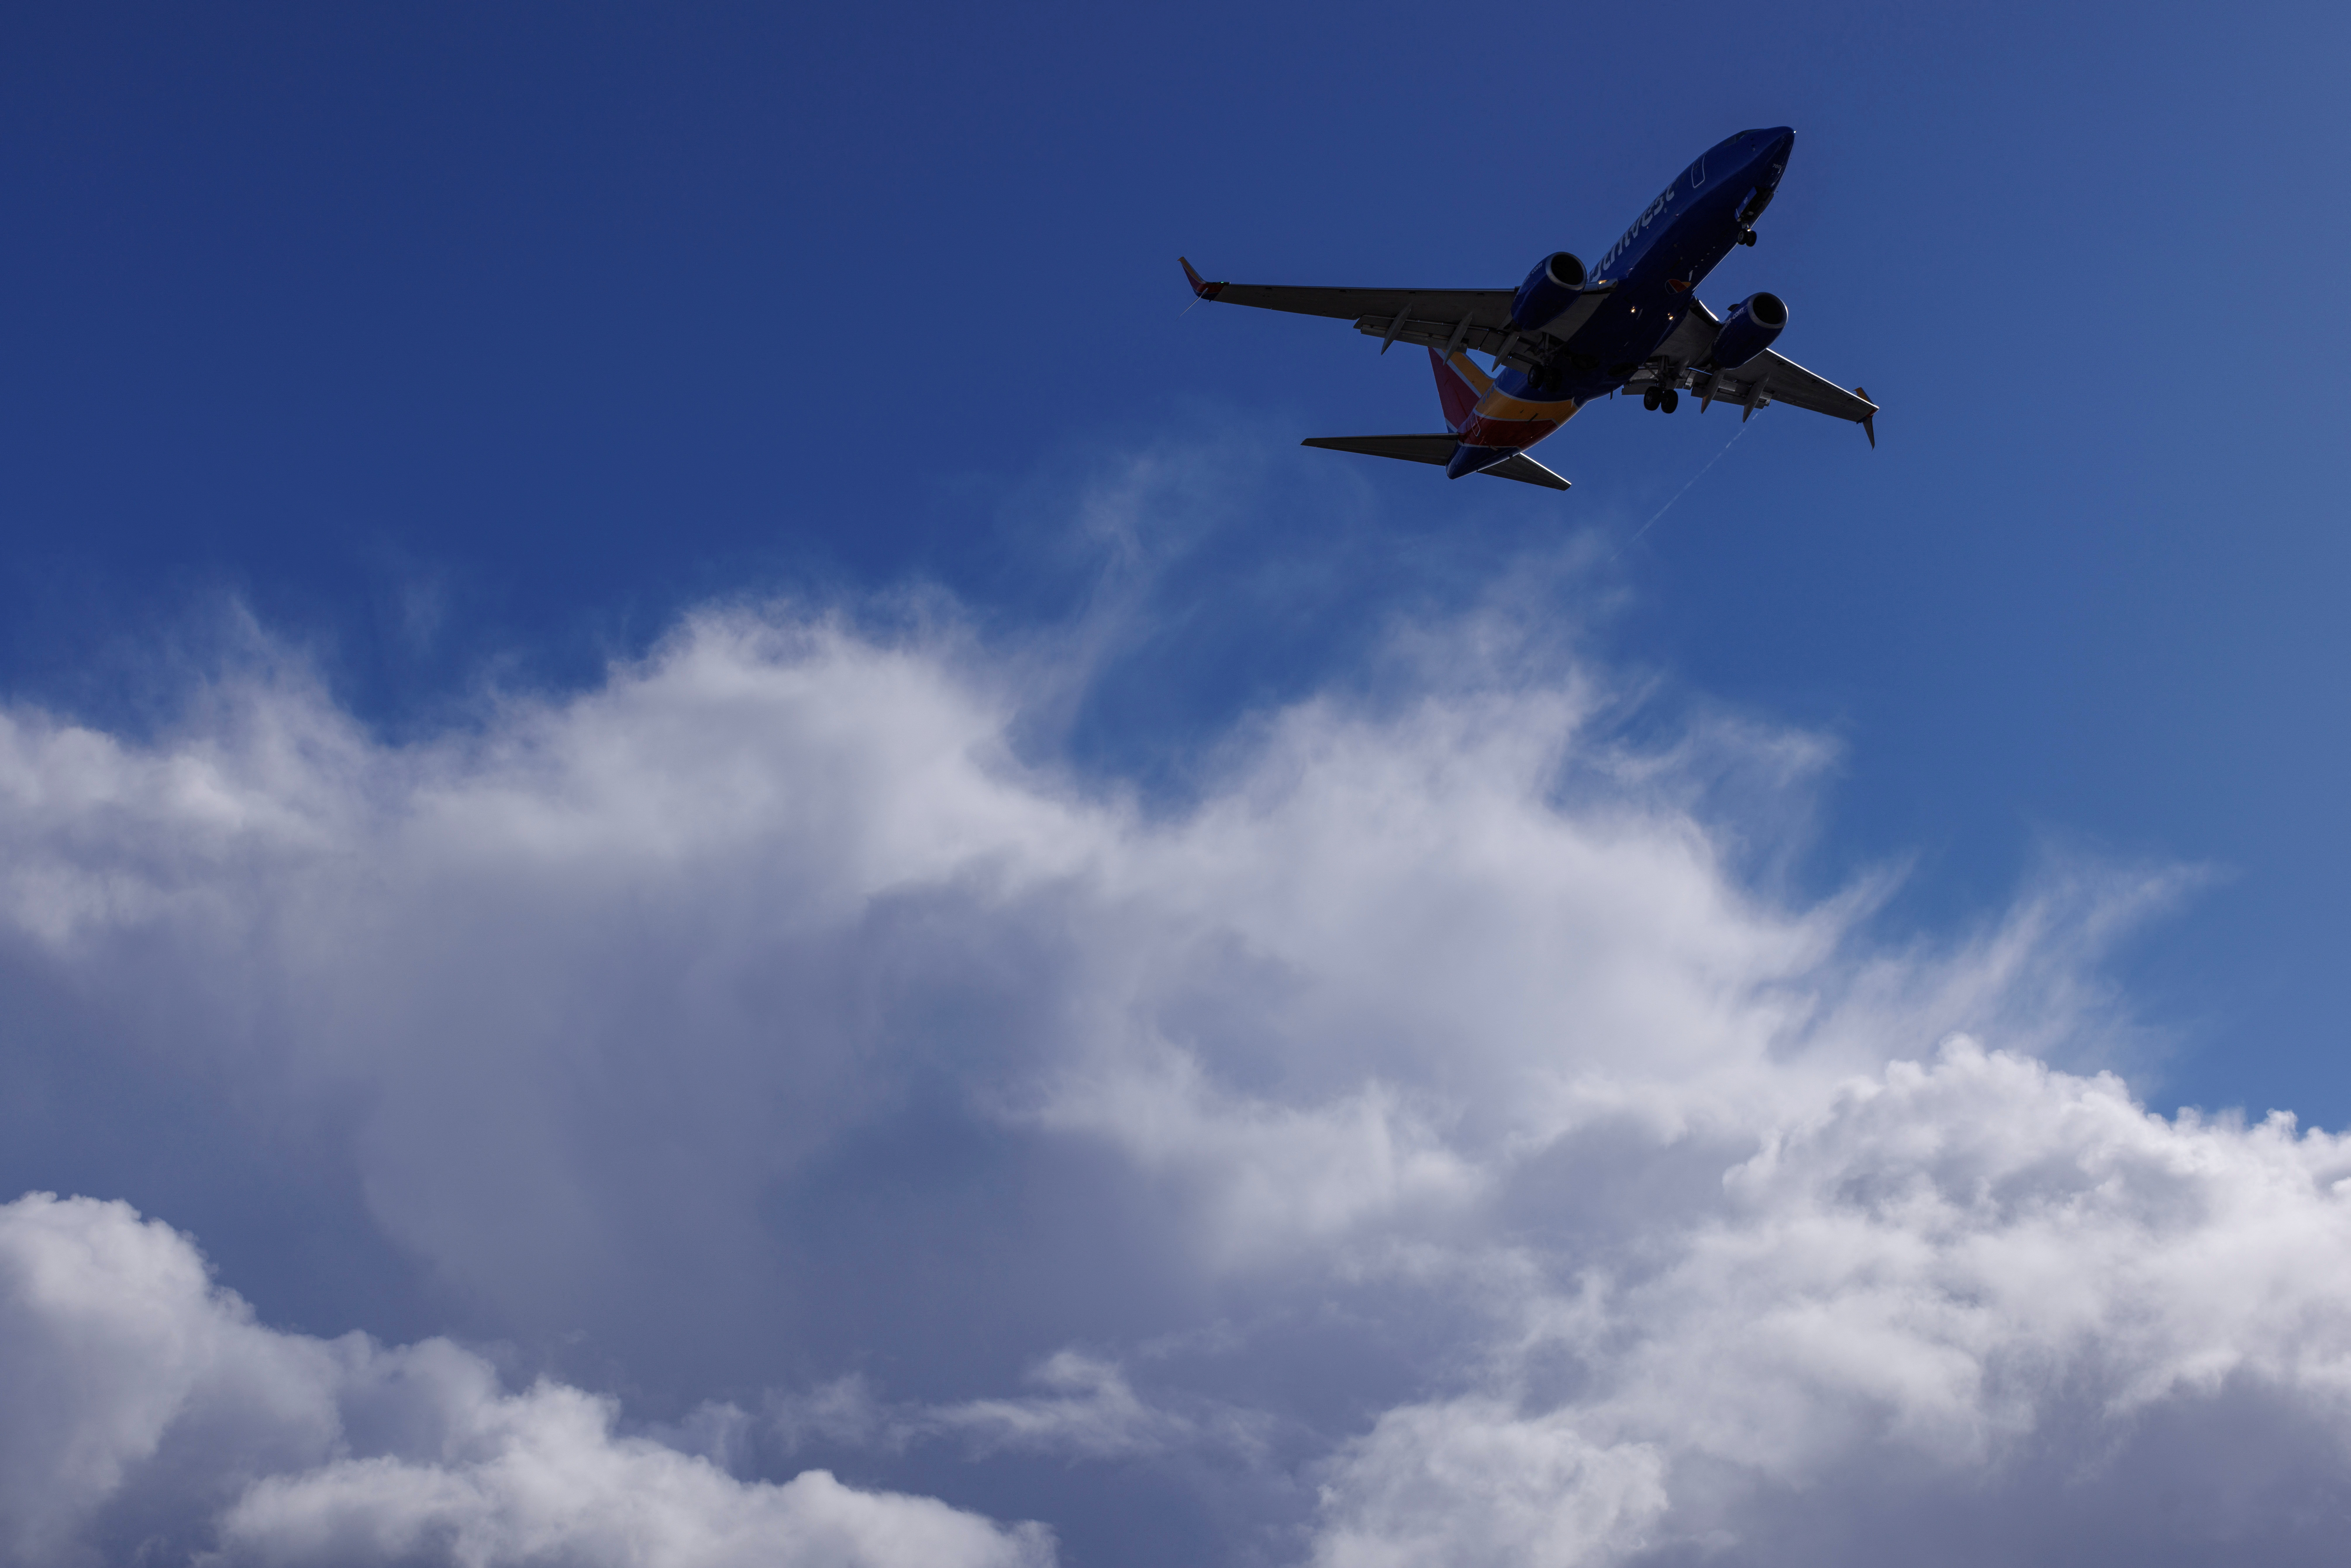 A Southwest Airlines flight descends past stpmy sky in California